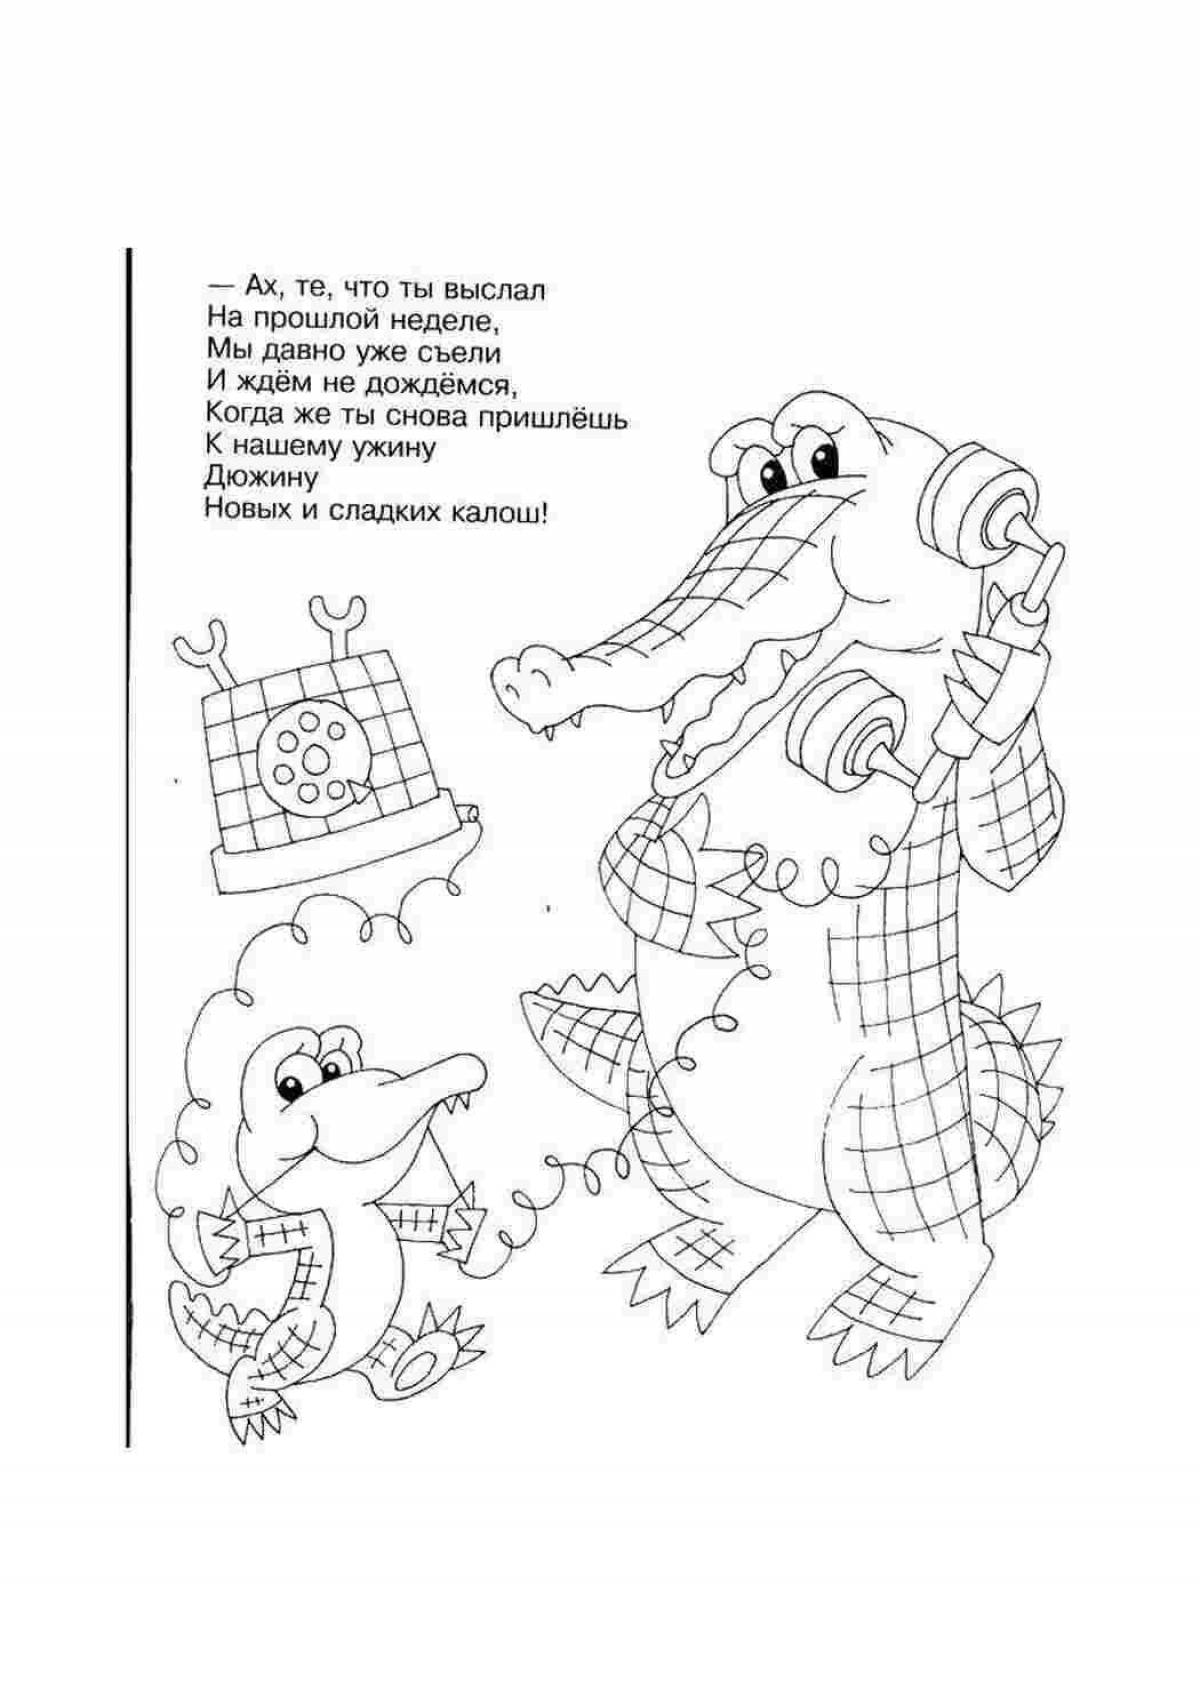 Coloring book Chukovsky's mysterious tale